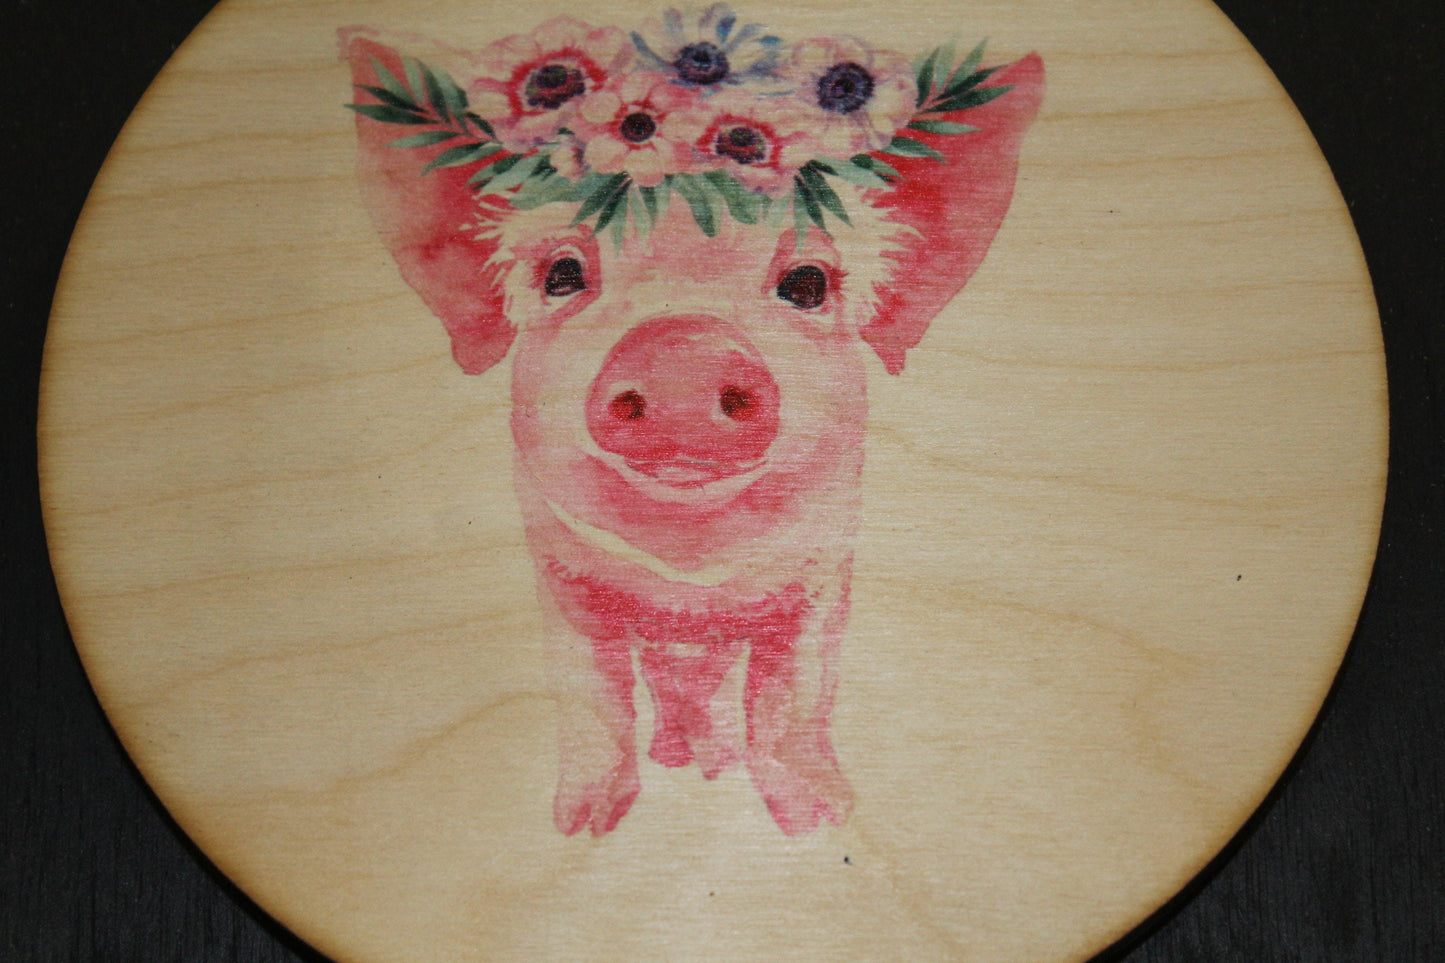 Pig Floral Wreath Crown Piglet Ornament Baby Flowers Face Ears Spots Wall Hanging Tree Rustic Farmhouse Wood